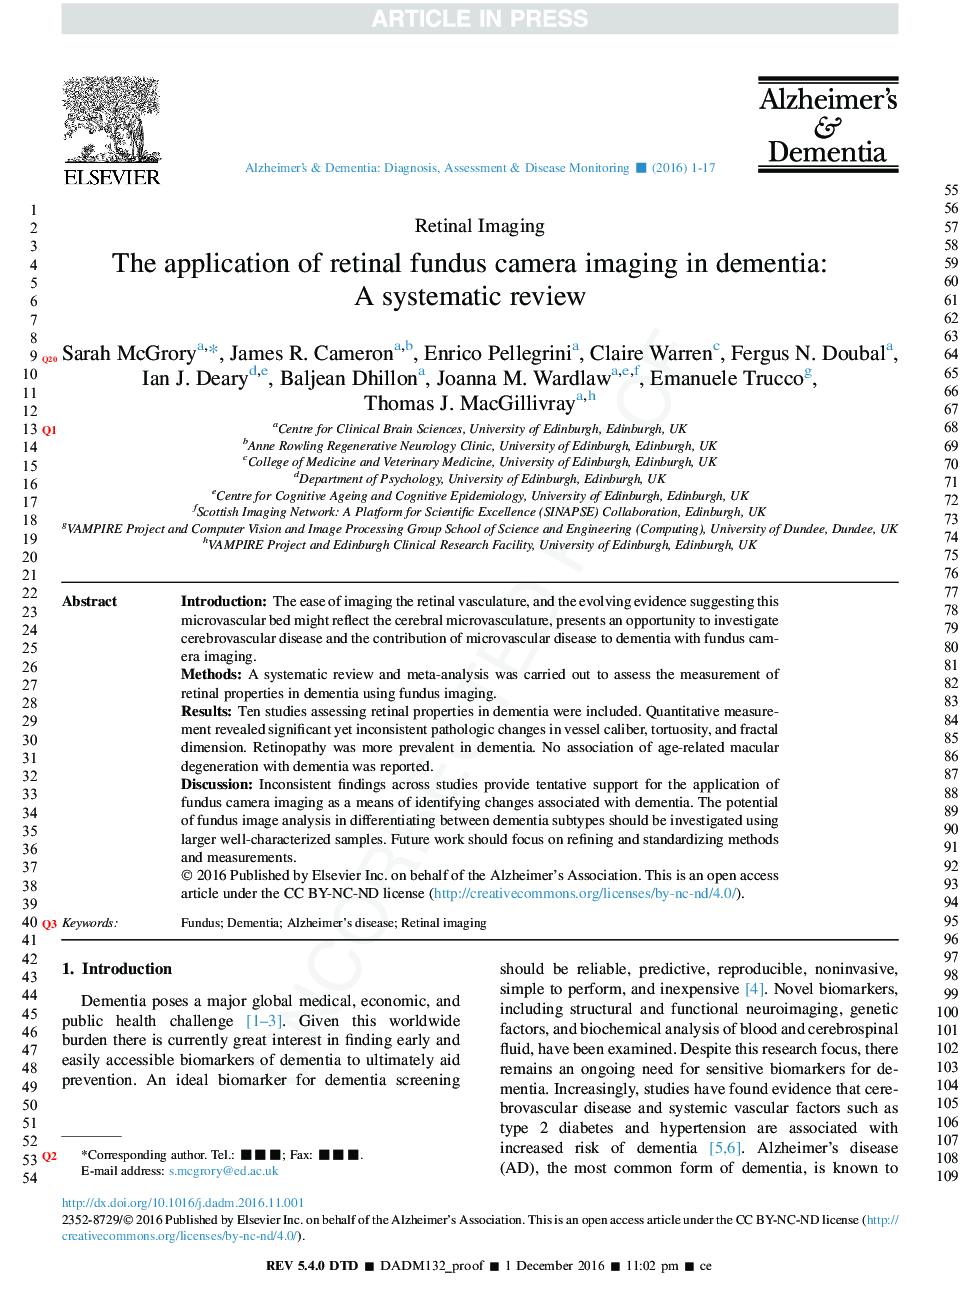 The application of retinal fundus camera imaging in dementia: A systematic review